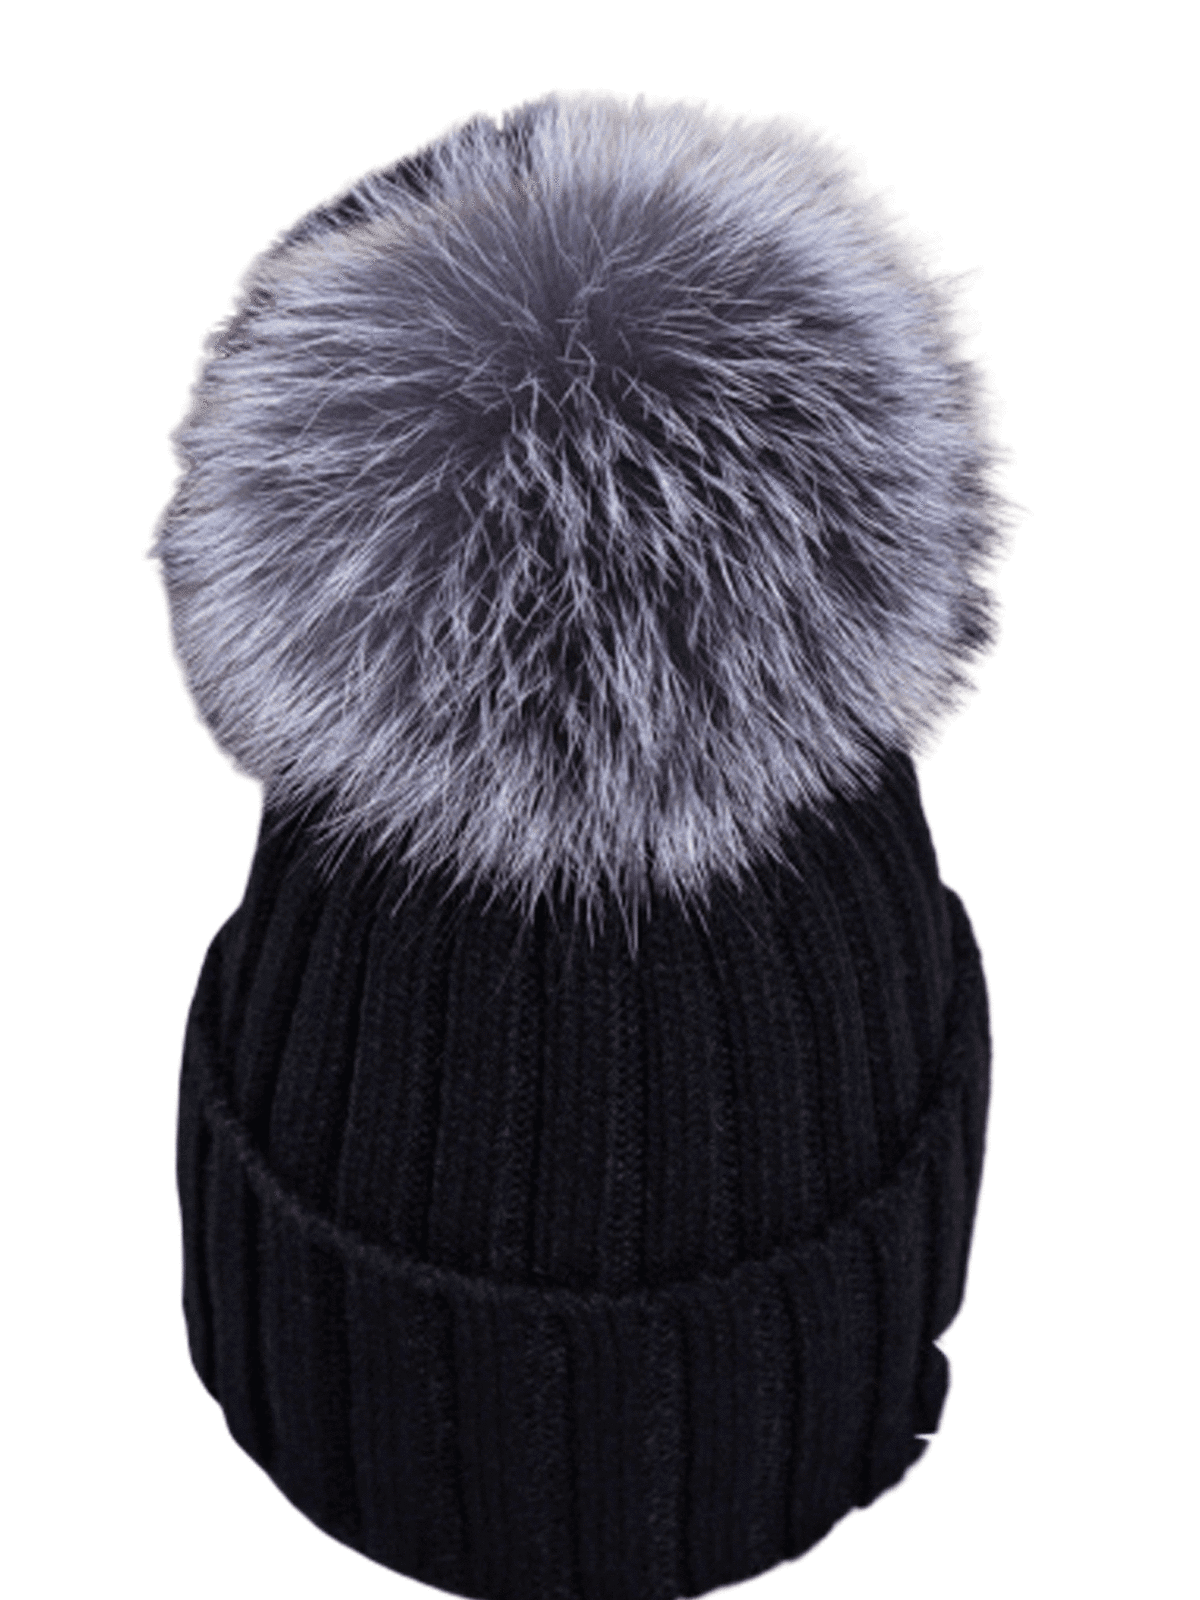 Cute Beanies For Girls Women Real Natural Fur Pom Pom with Beads Knitted Hat 